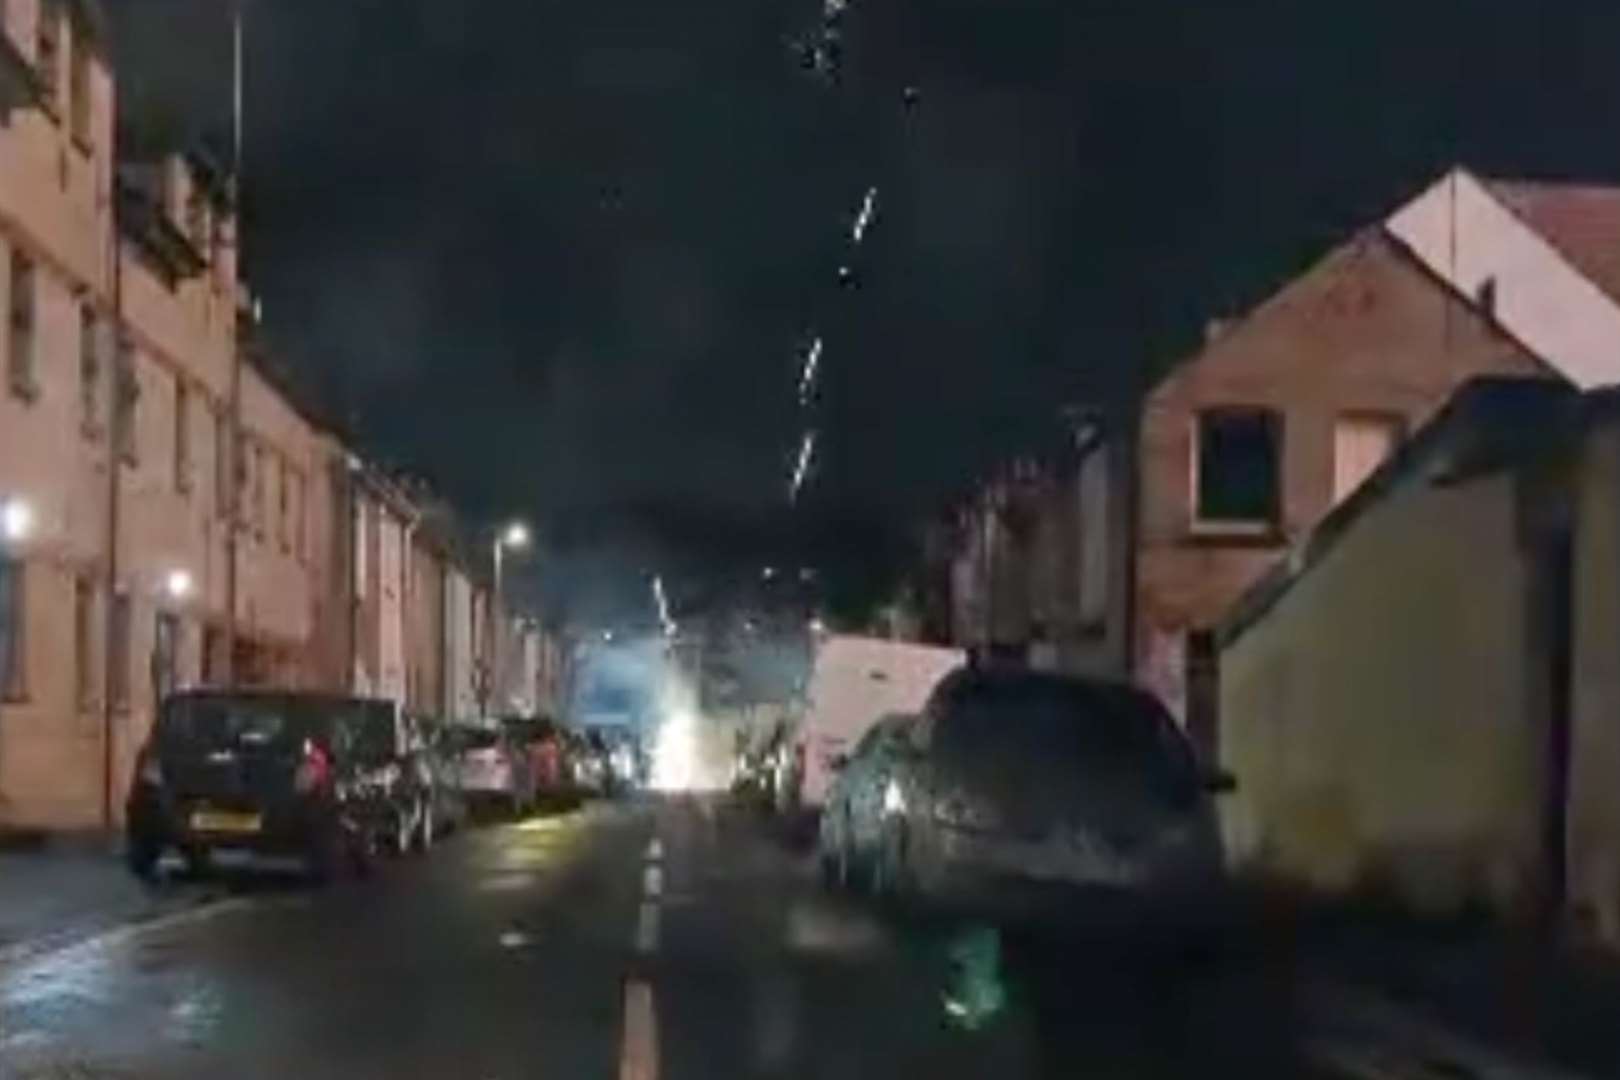 Fireworks were let off dangerously close to buildings in Chatham